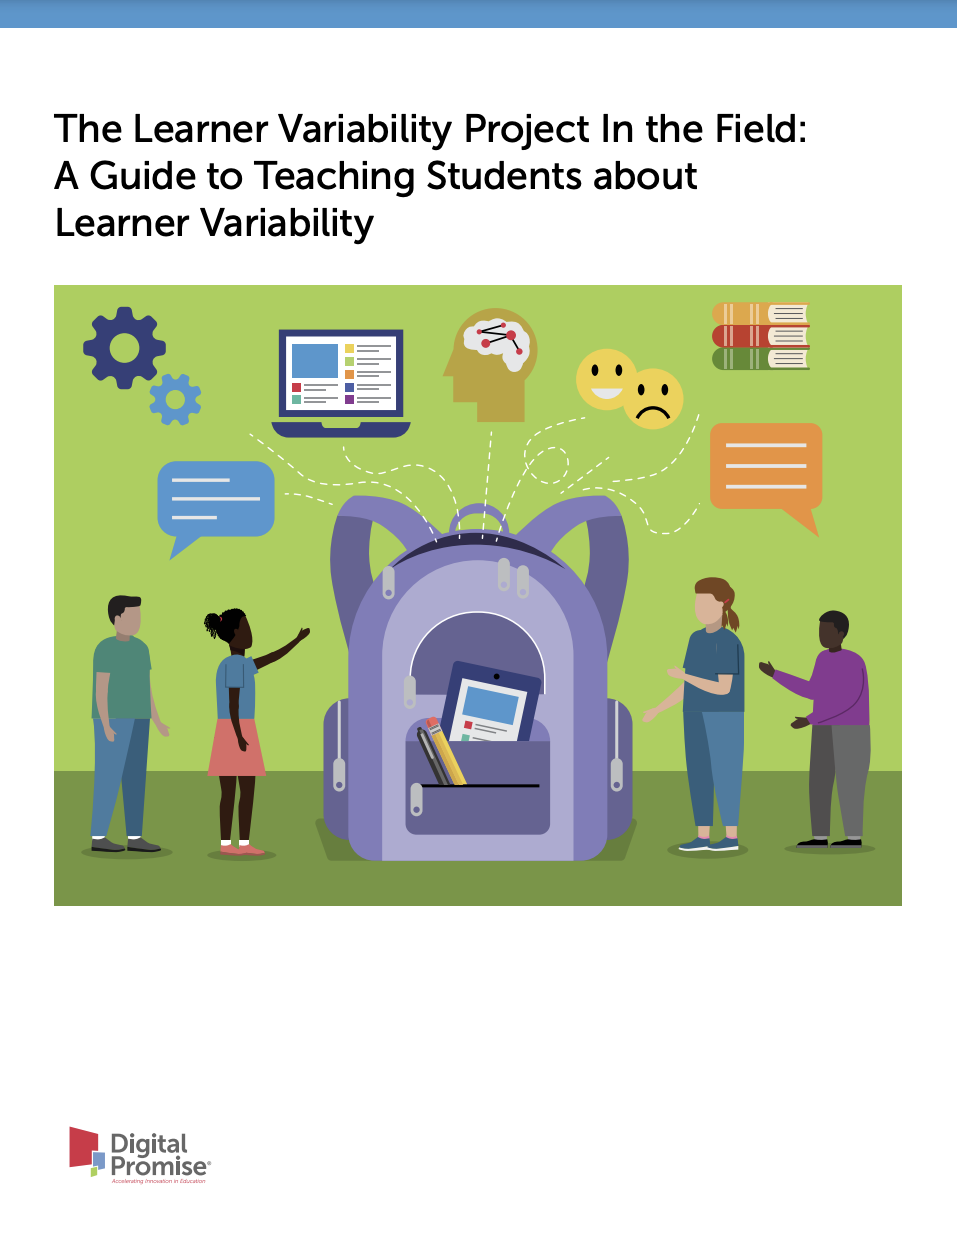 Thumbnail cover of "The Learner Variability Project In the Field:A Guide to Teaching Students about Learner Variability," contains text and visuals including a large purple backpack with various elements spilling out